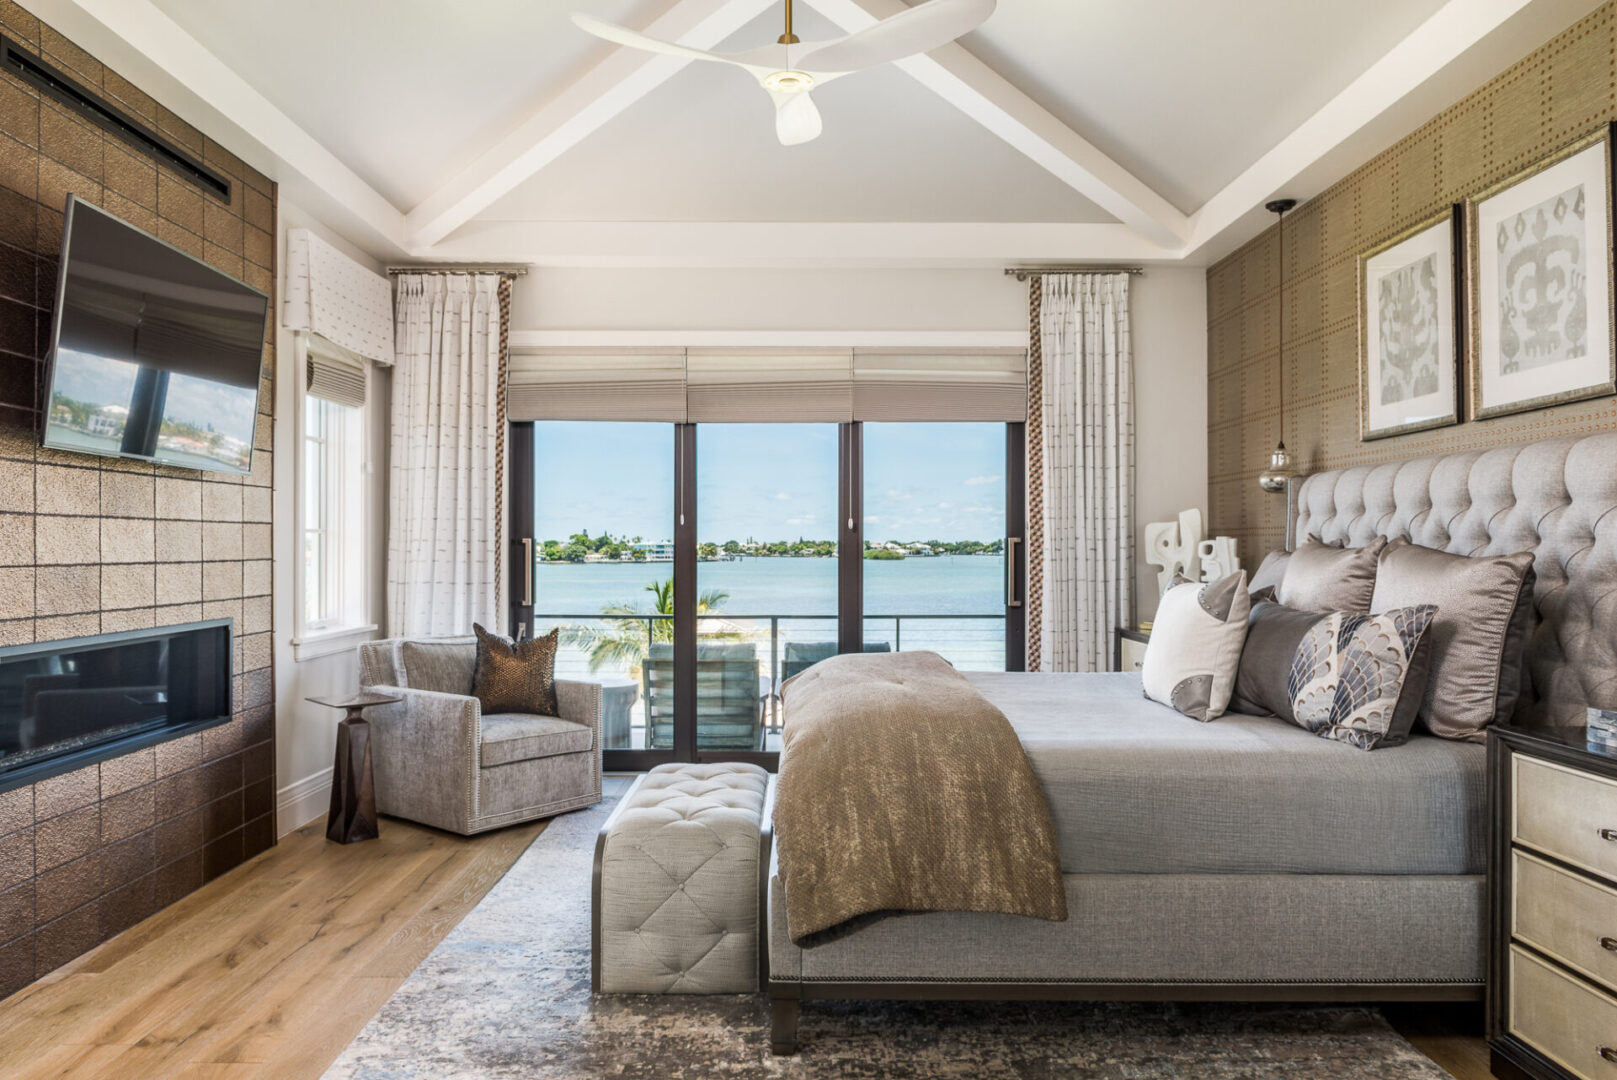 A Bedroom Overlooking a Lake With Silk Throw Pillows